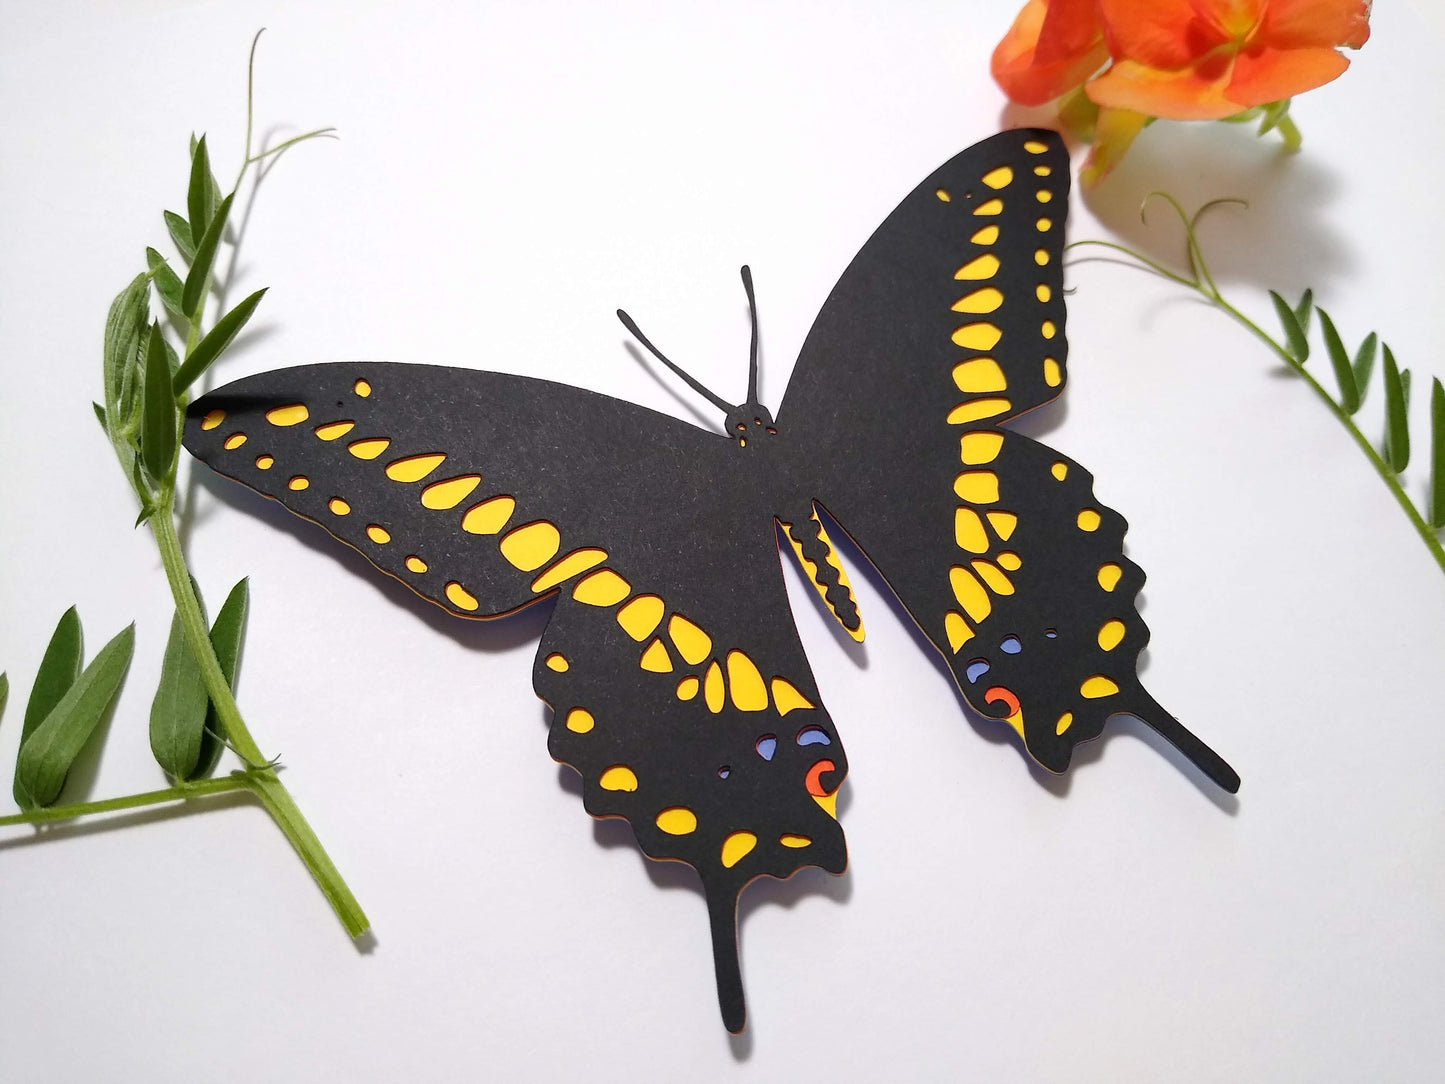 Multi-layered paper butterfly, in the design of a Black Swallowtail butterfly. It rests next to several sprigs of leaves and a small orange flower.